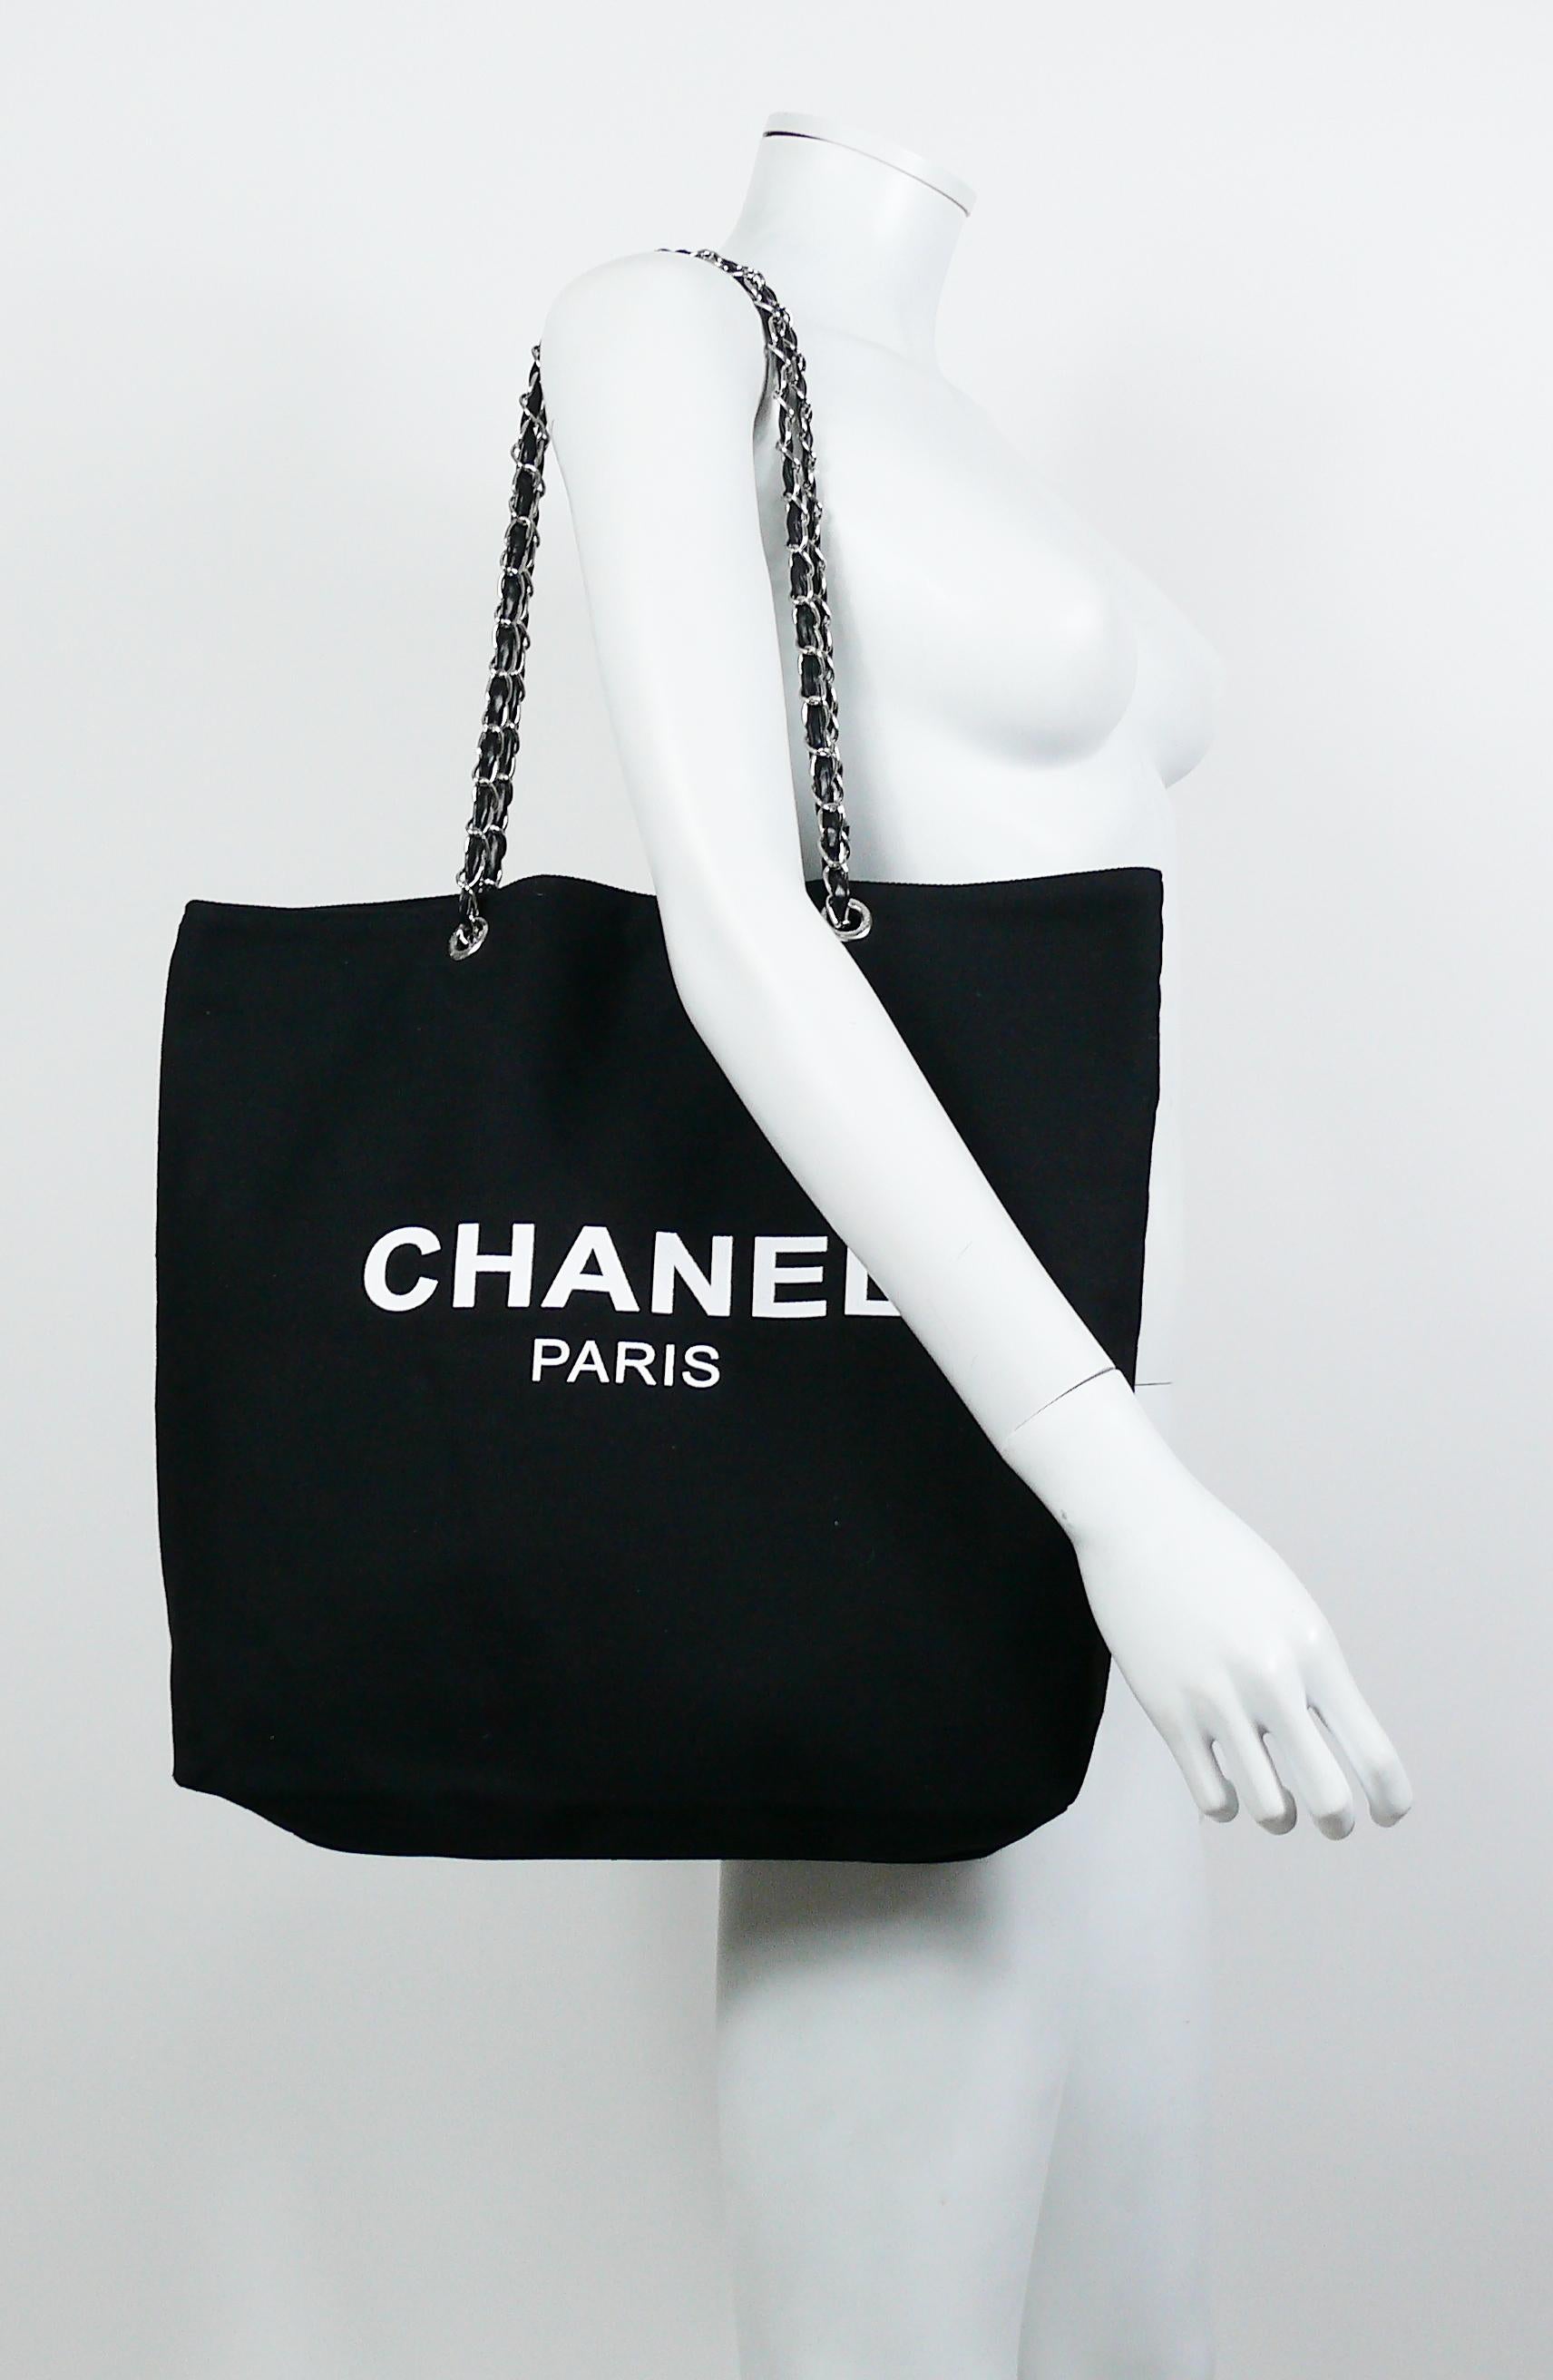 CHANEL black canvas tote shopping gift bag.

This bag features :
- Black canvas body.
- White flocked CHANEL PARIS on one both sides.
- Silver toned chains with intertwined black faux leather (PVC) straps.
- Magnetic closure.
- Silver toned